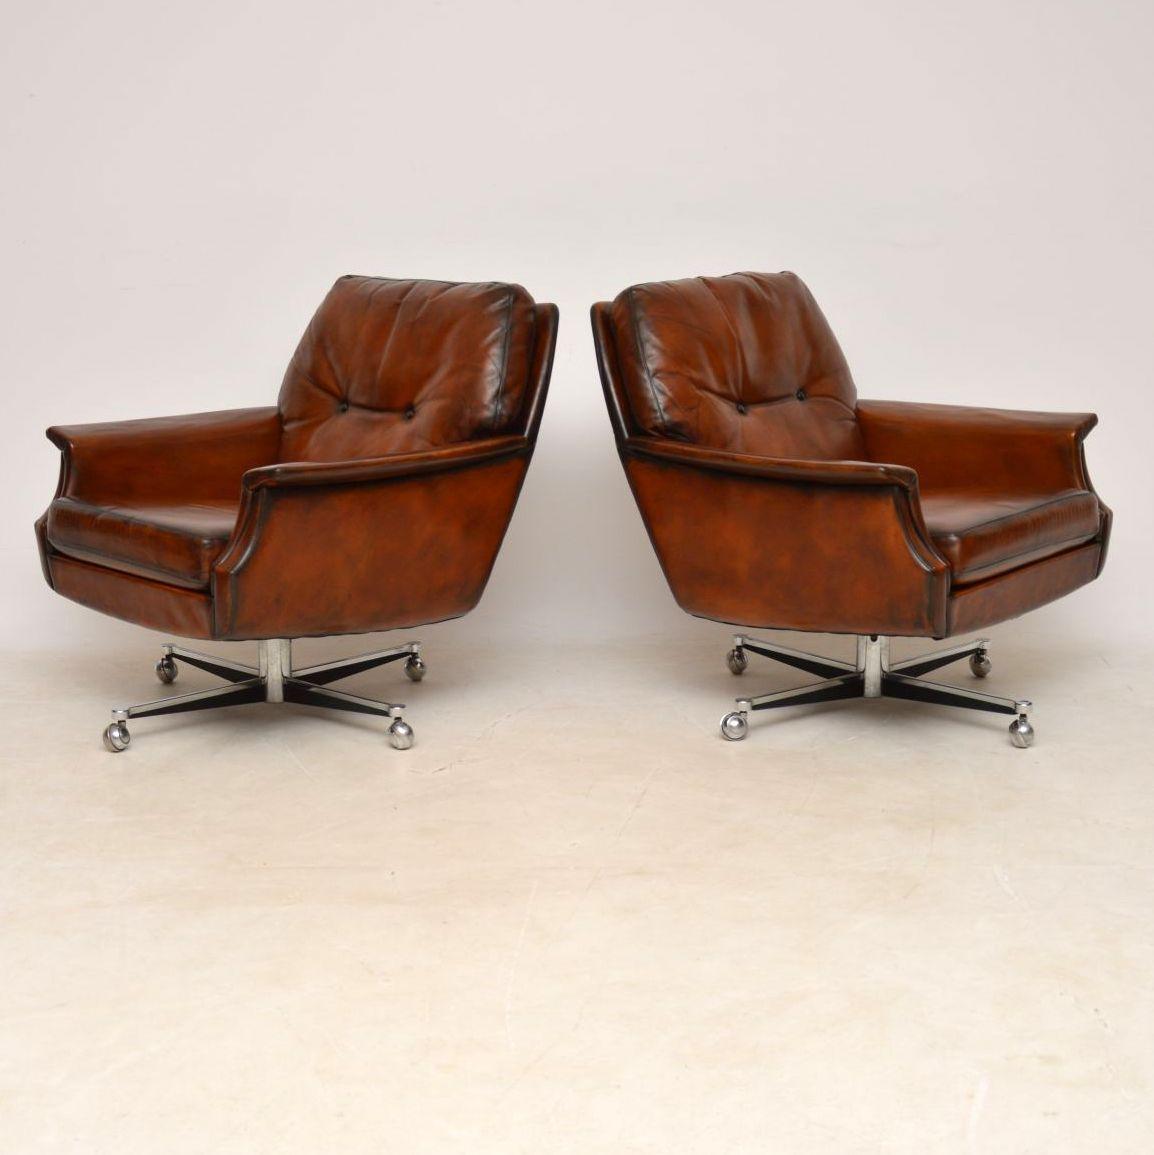 A beautiful and extremely comfortable pair of vintage leather swivel armchairs, sitting on splayed chrome bases. They date from the 1960-70’s, these are of amazing quality and are in superb condition for their age. We have had these professionally